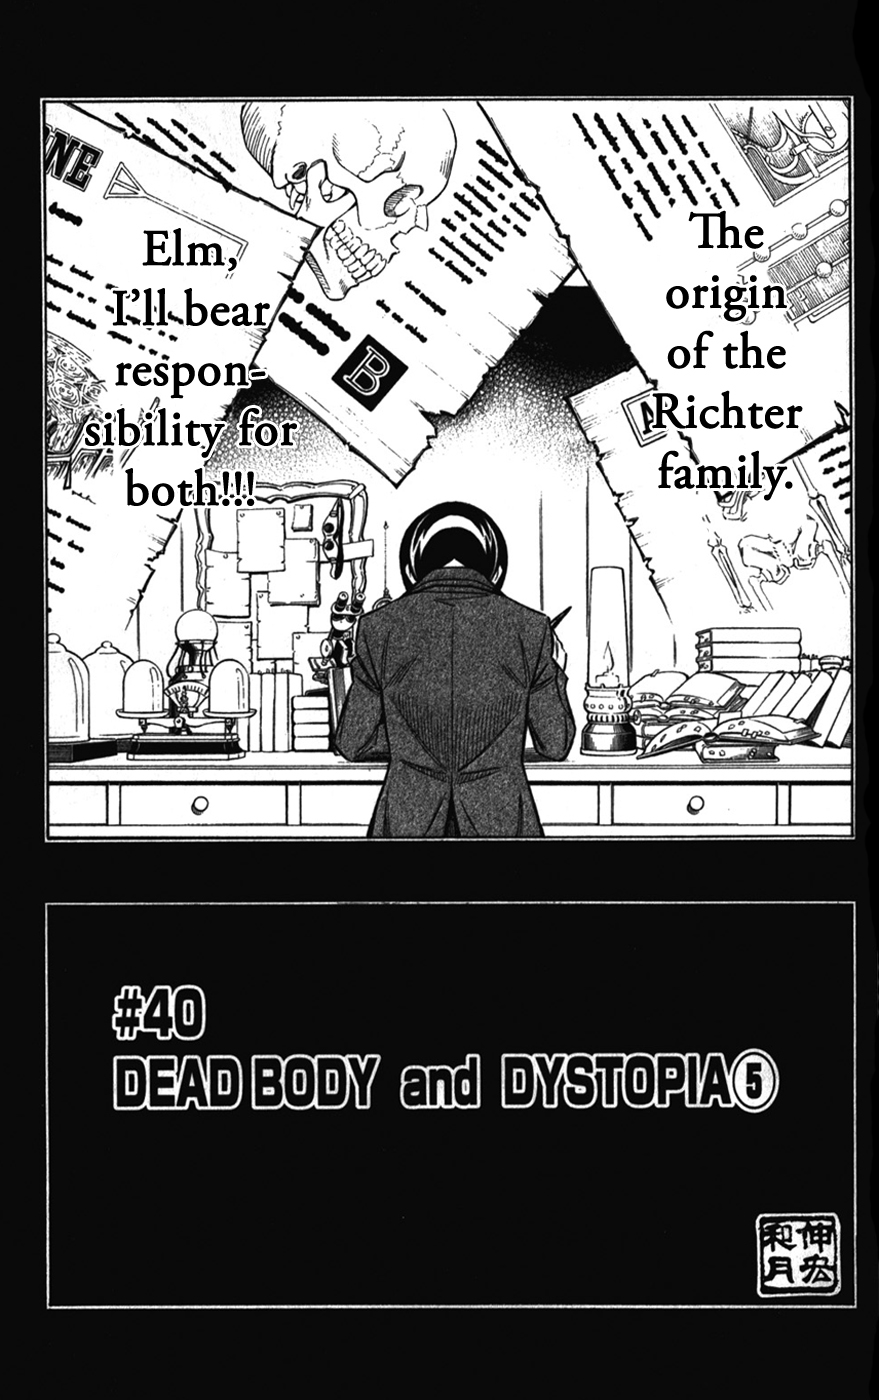 Embalming The Another Tale of Frankenstein Vol. 7 Ch. 40 DEAD BODY and DYSTOPIA (5)